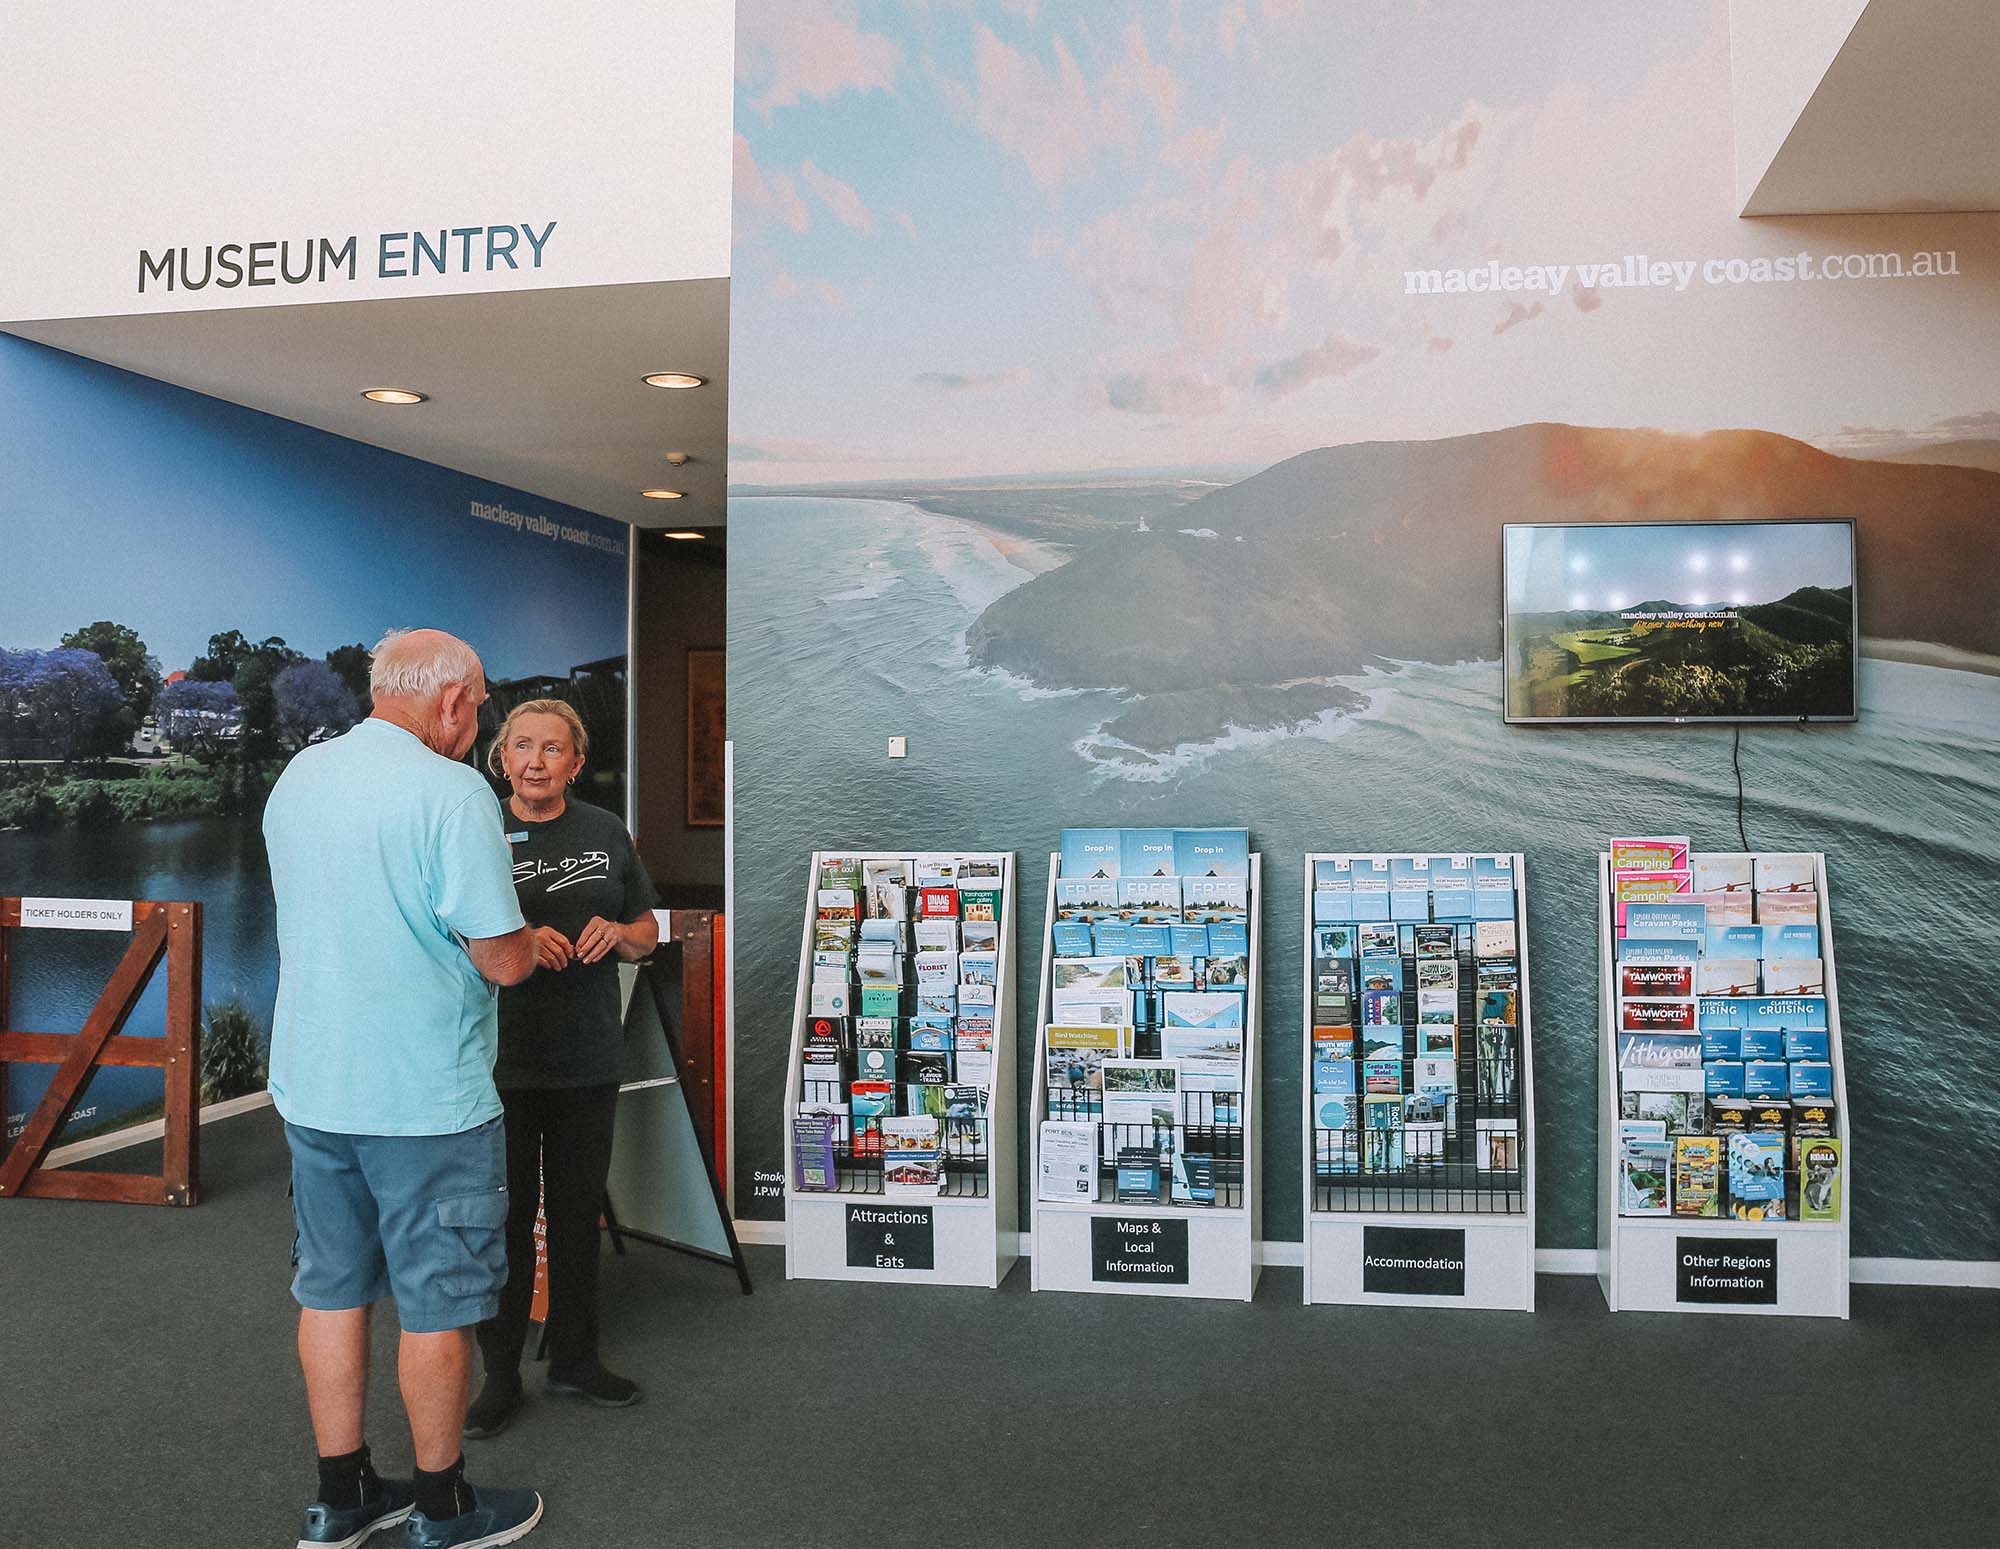 Customer experience officer helping with visitor information at the Slim Dusty Centre.